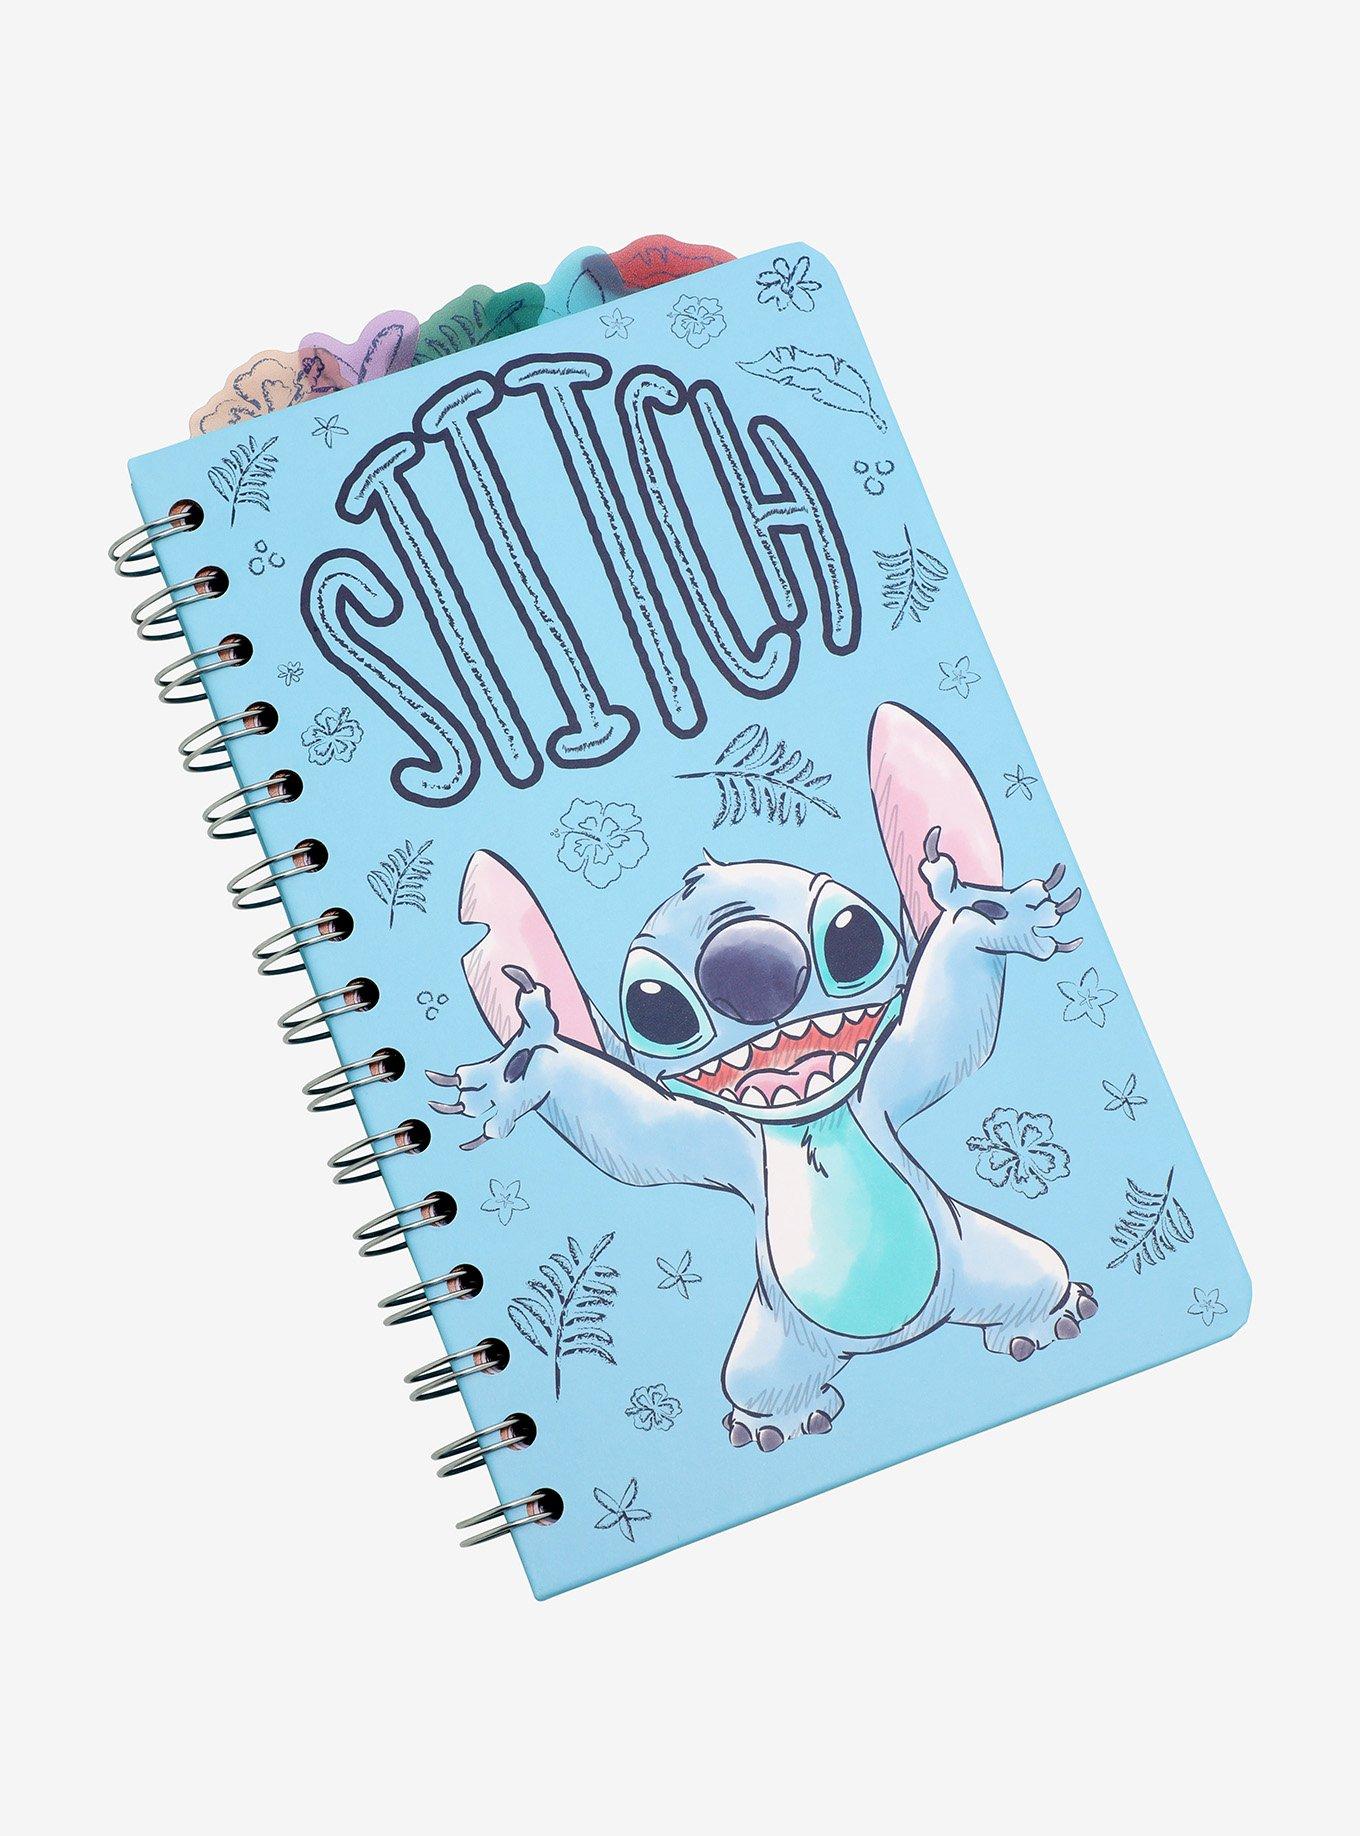 Disney Lilo and Stitch Stickers Coloring and Activity Book Set - Giant Lilo  and Stitch Activity Book with Stickers, Games, Puzzles, and More